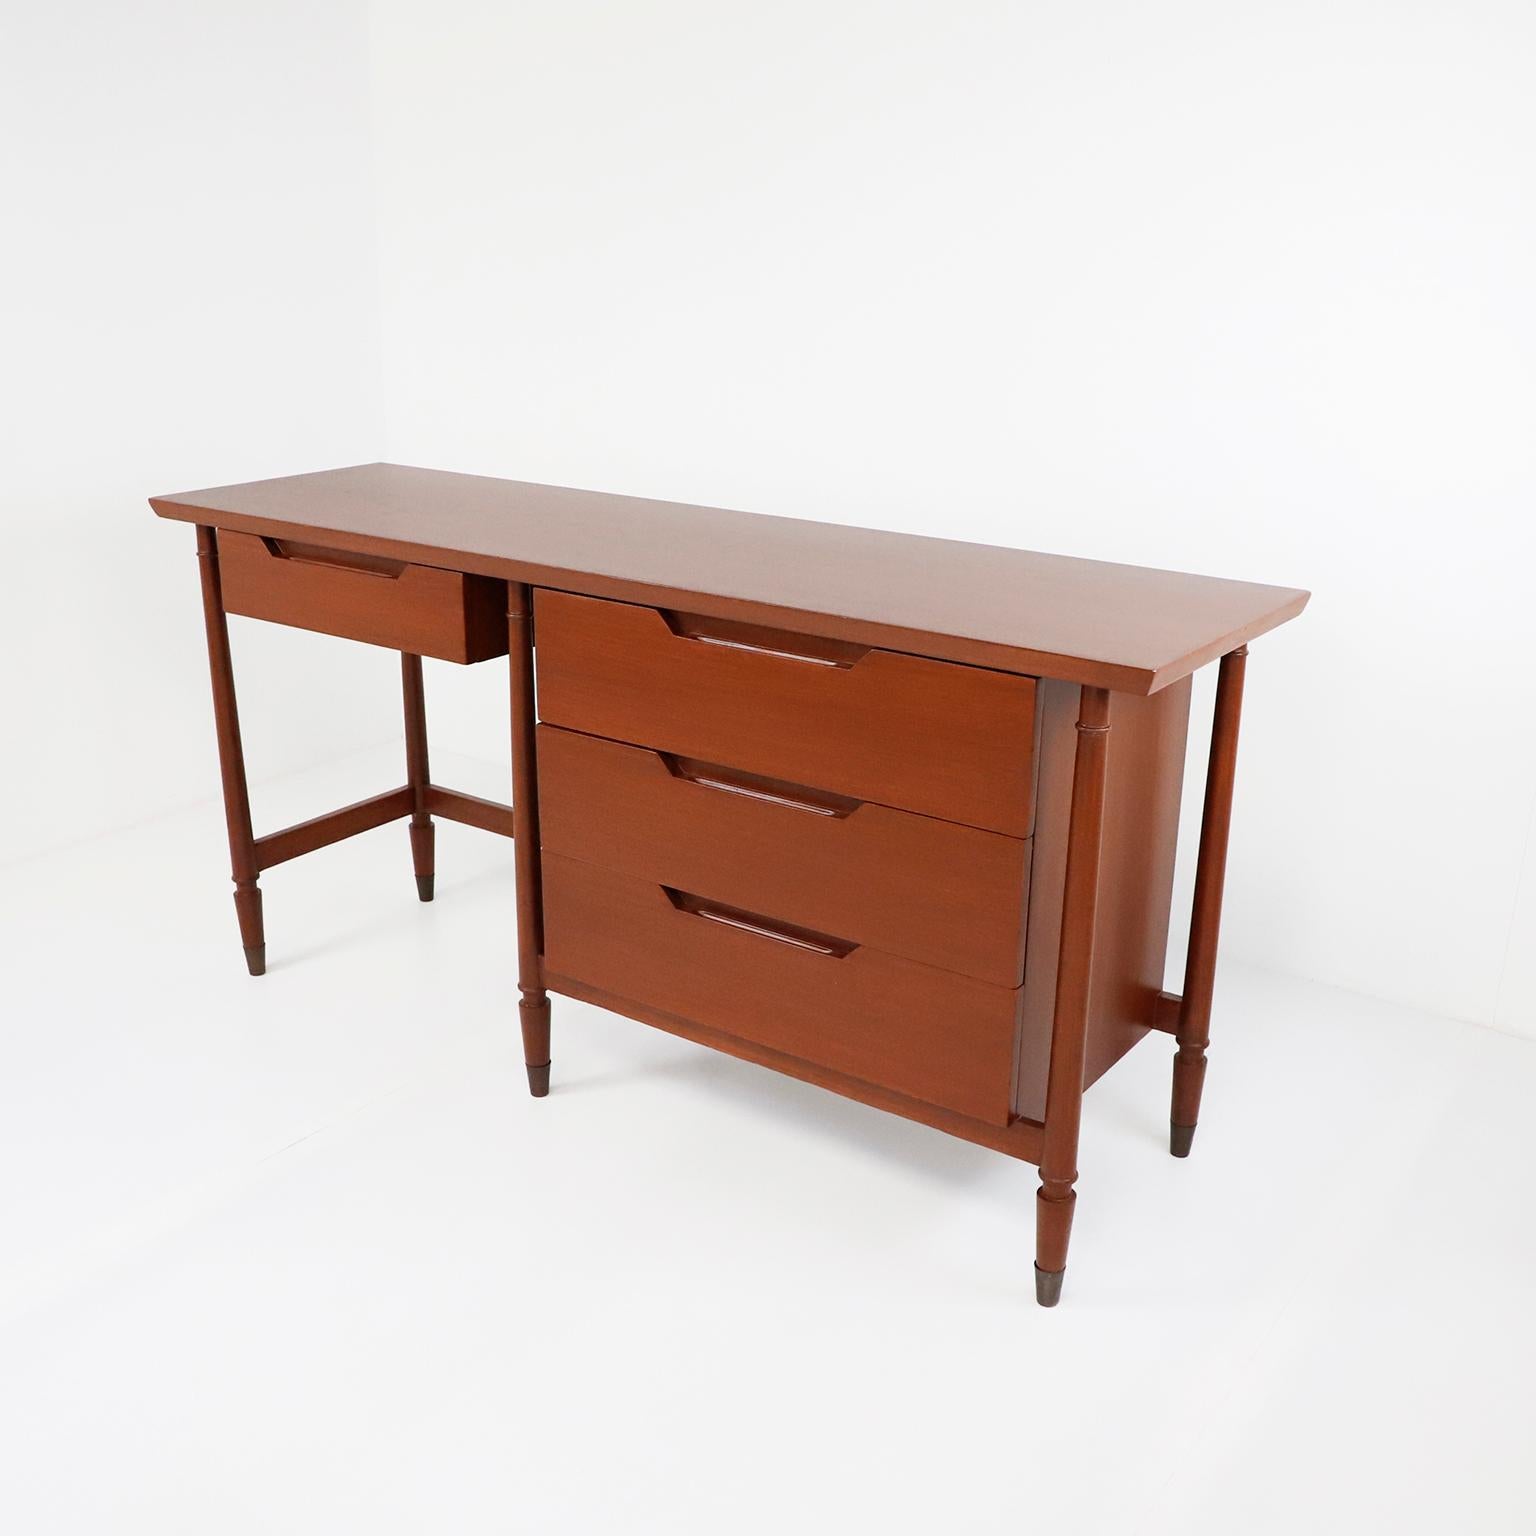 We offer this midcentury Mexican modern rare desk made in mahogany wood, recently restored, circa 1960.